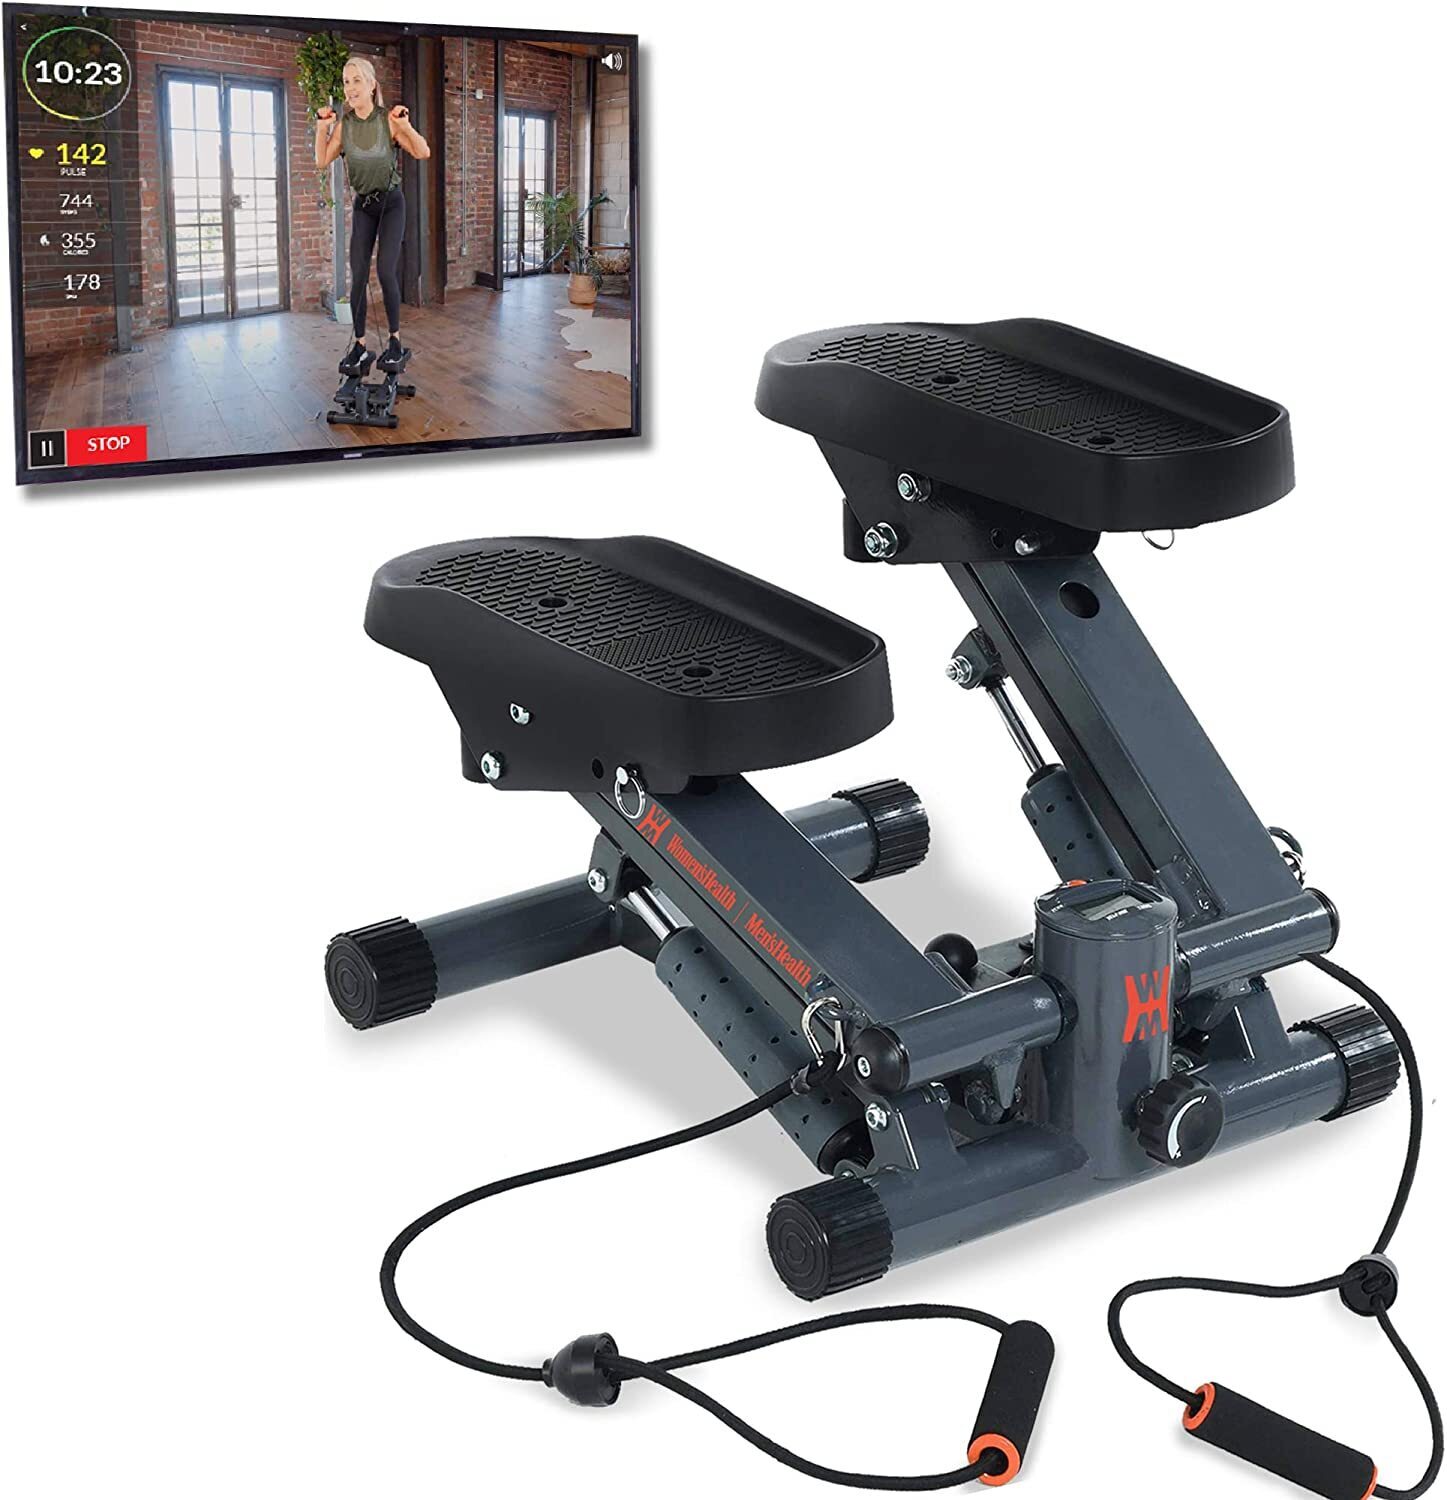 App Connected Manual Stair Stepper with Bluetooth Connectivity